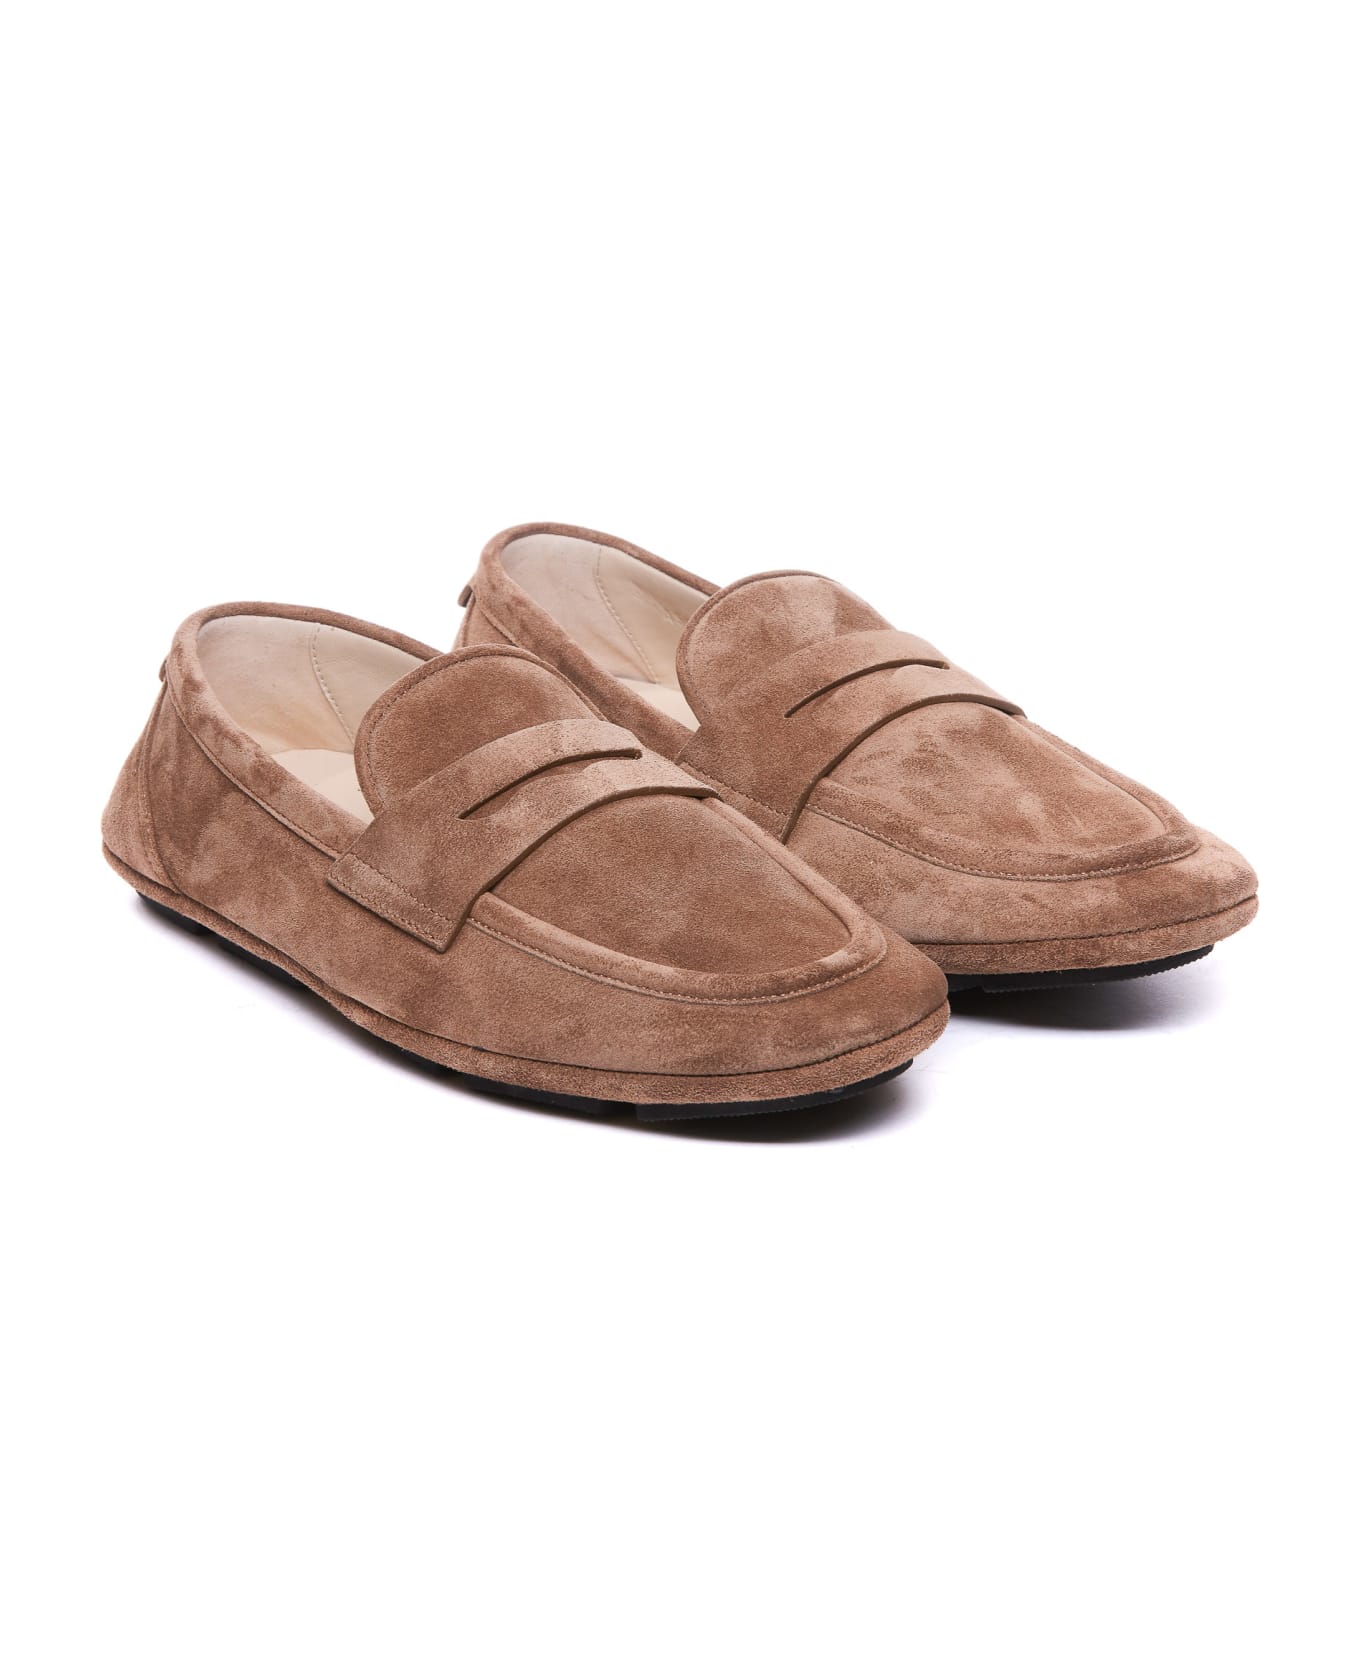 Dolce & Gabbana Loafers In Suede - Brown ローファー＆デッキシューズ